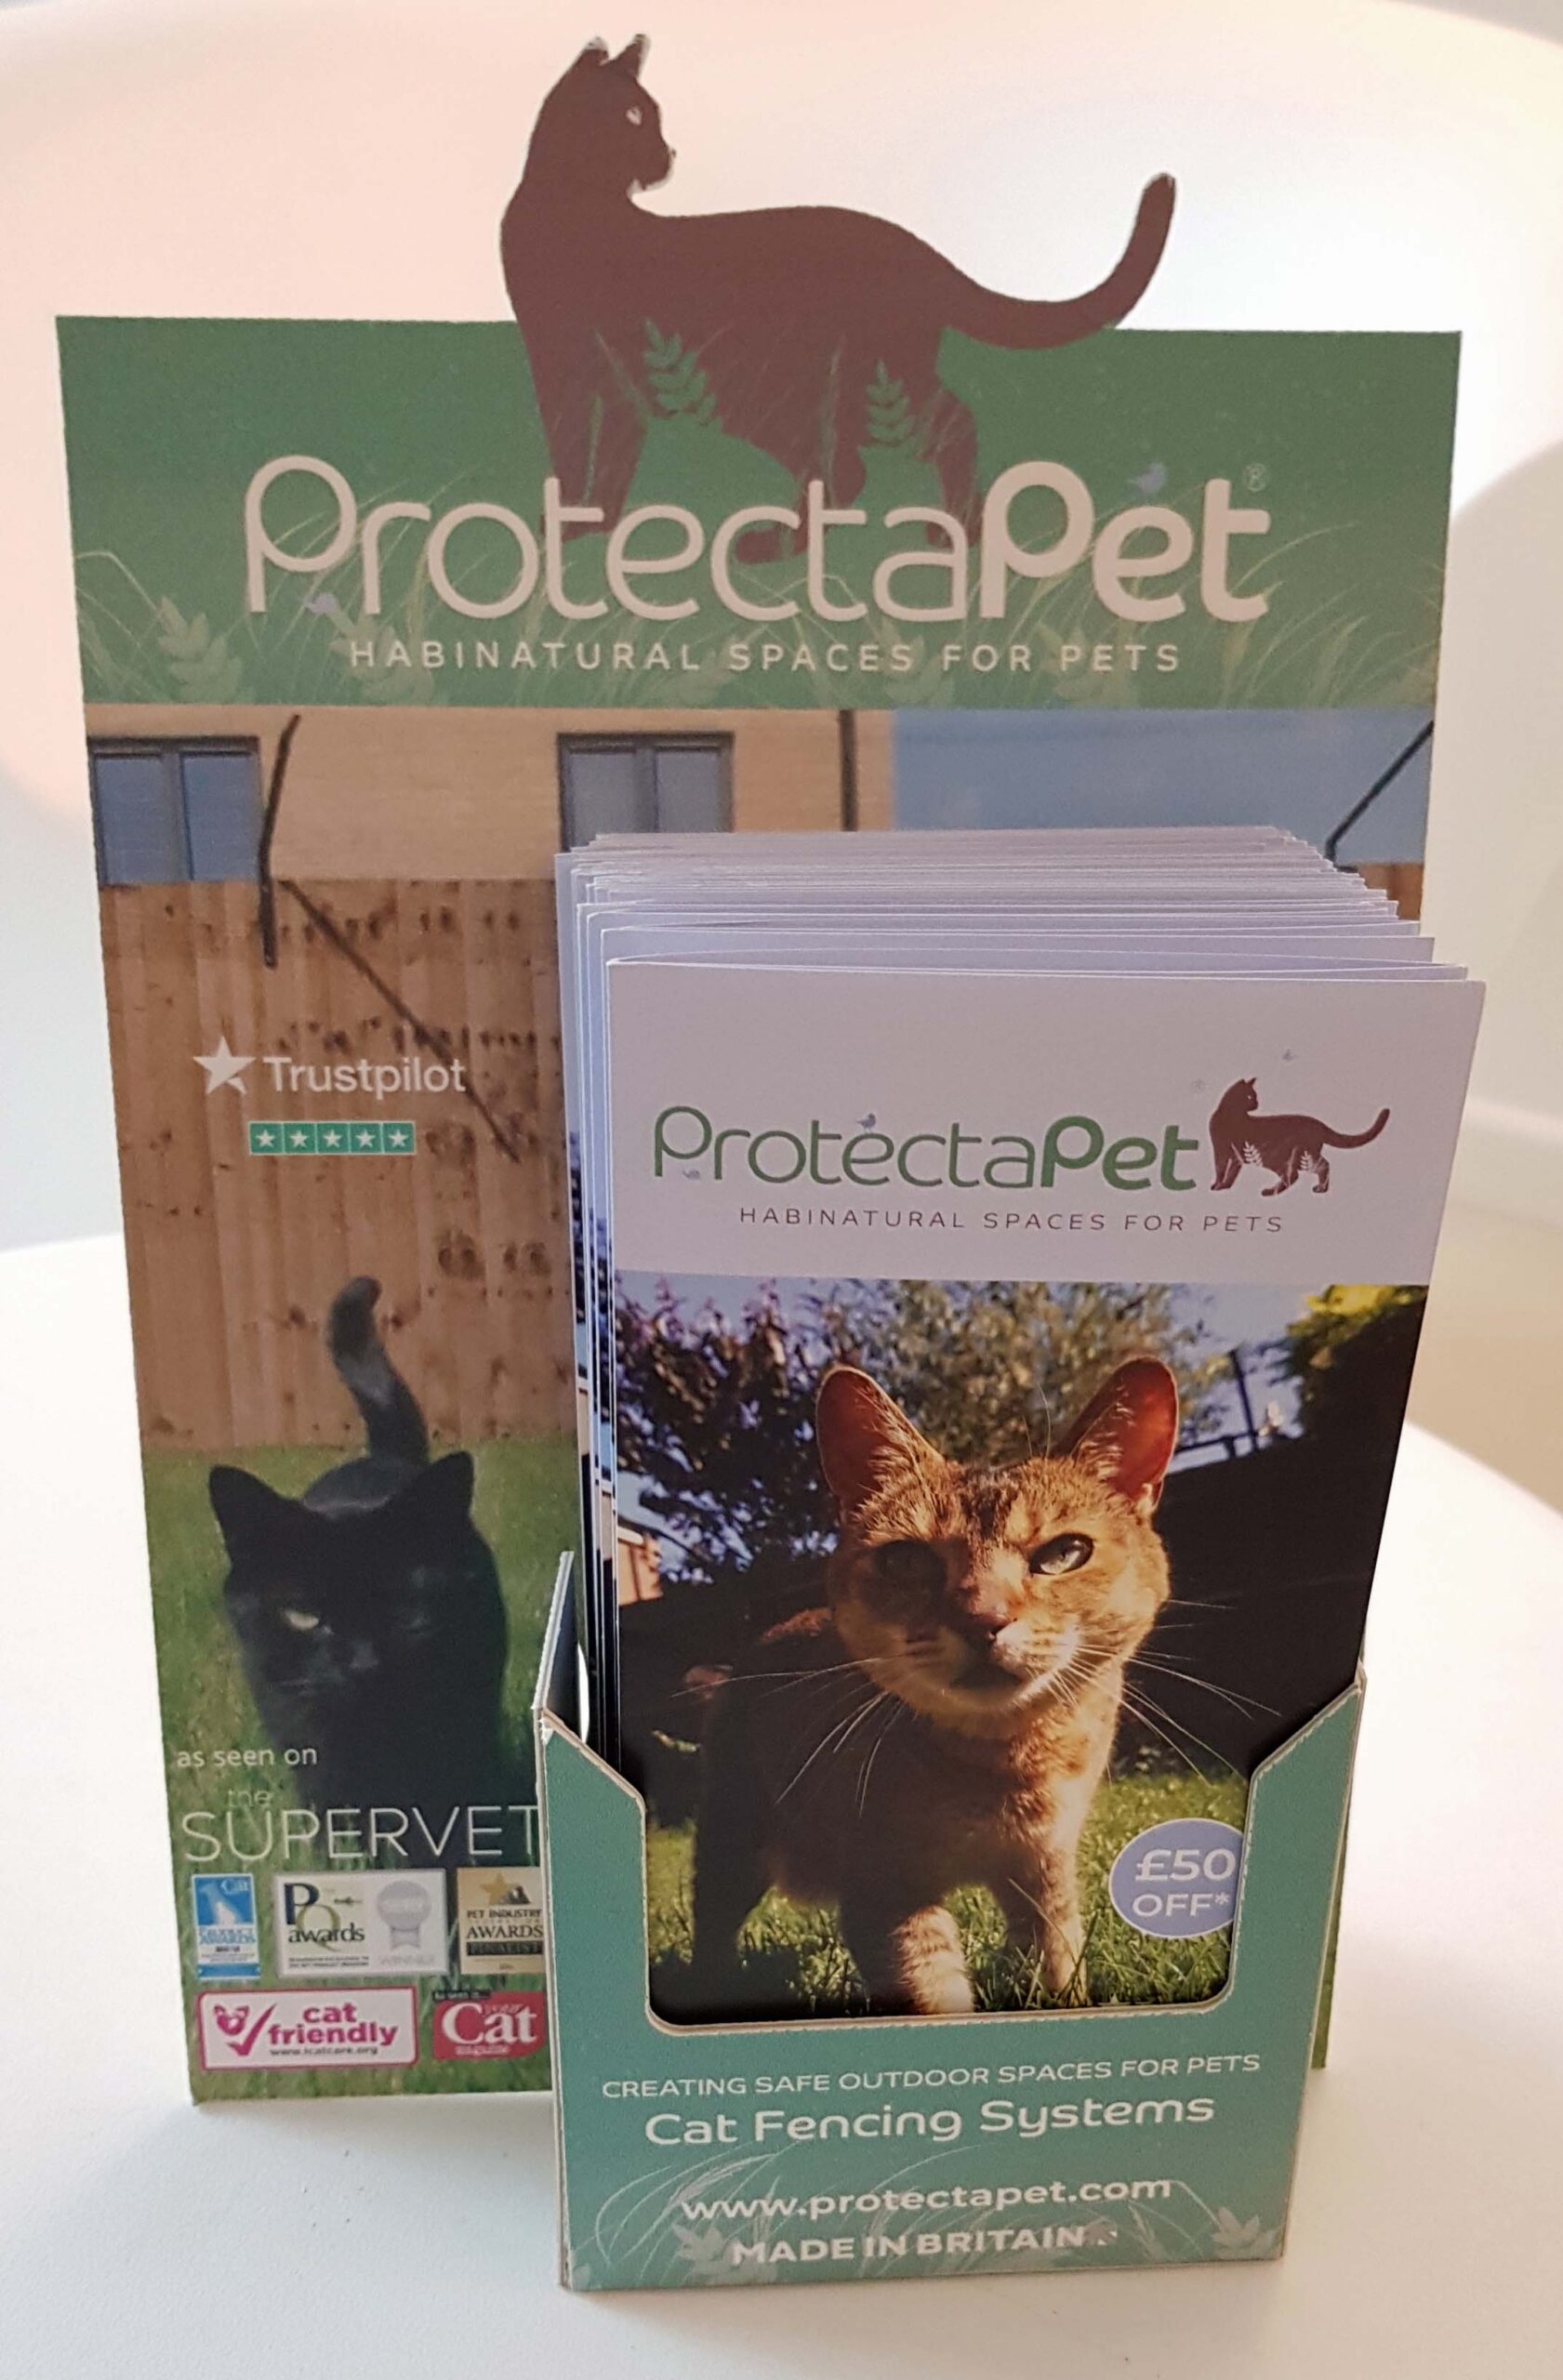 Cat Call partnered with ProtectaPet